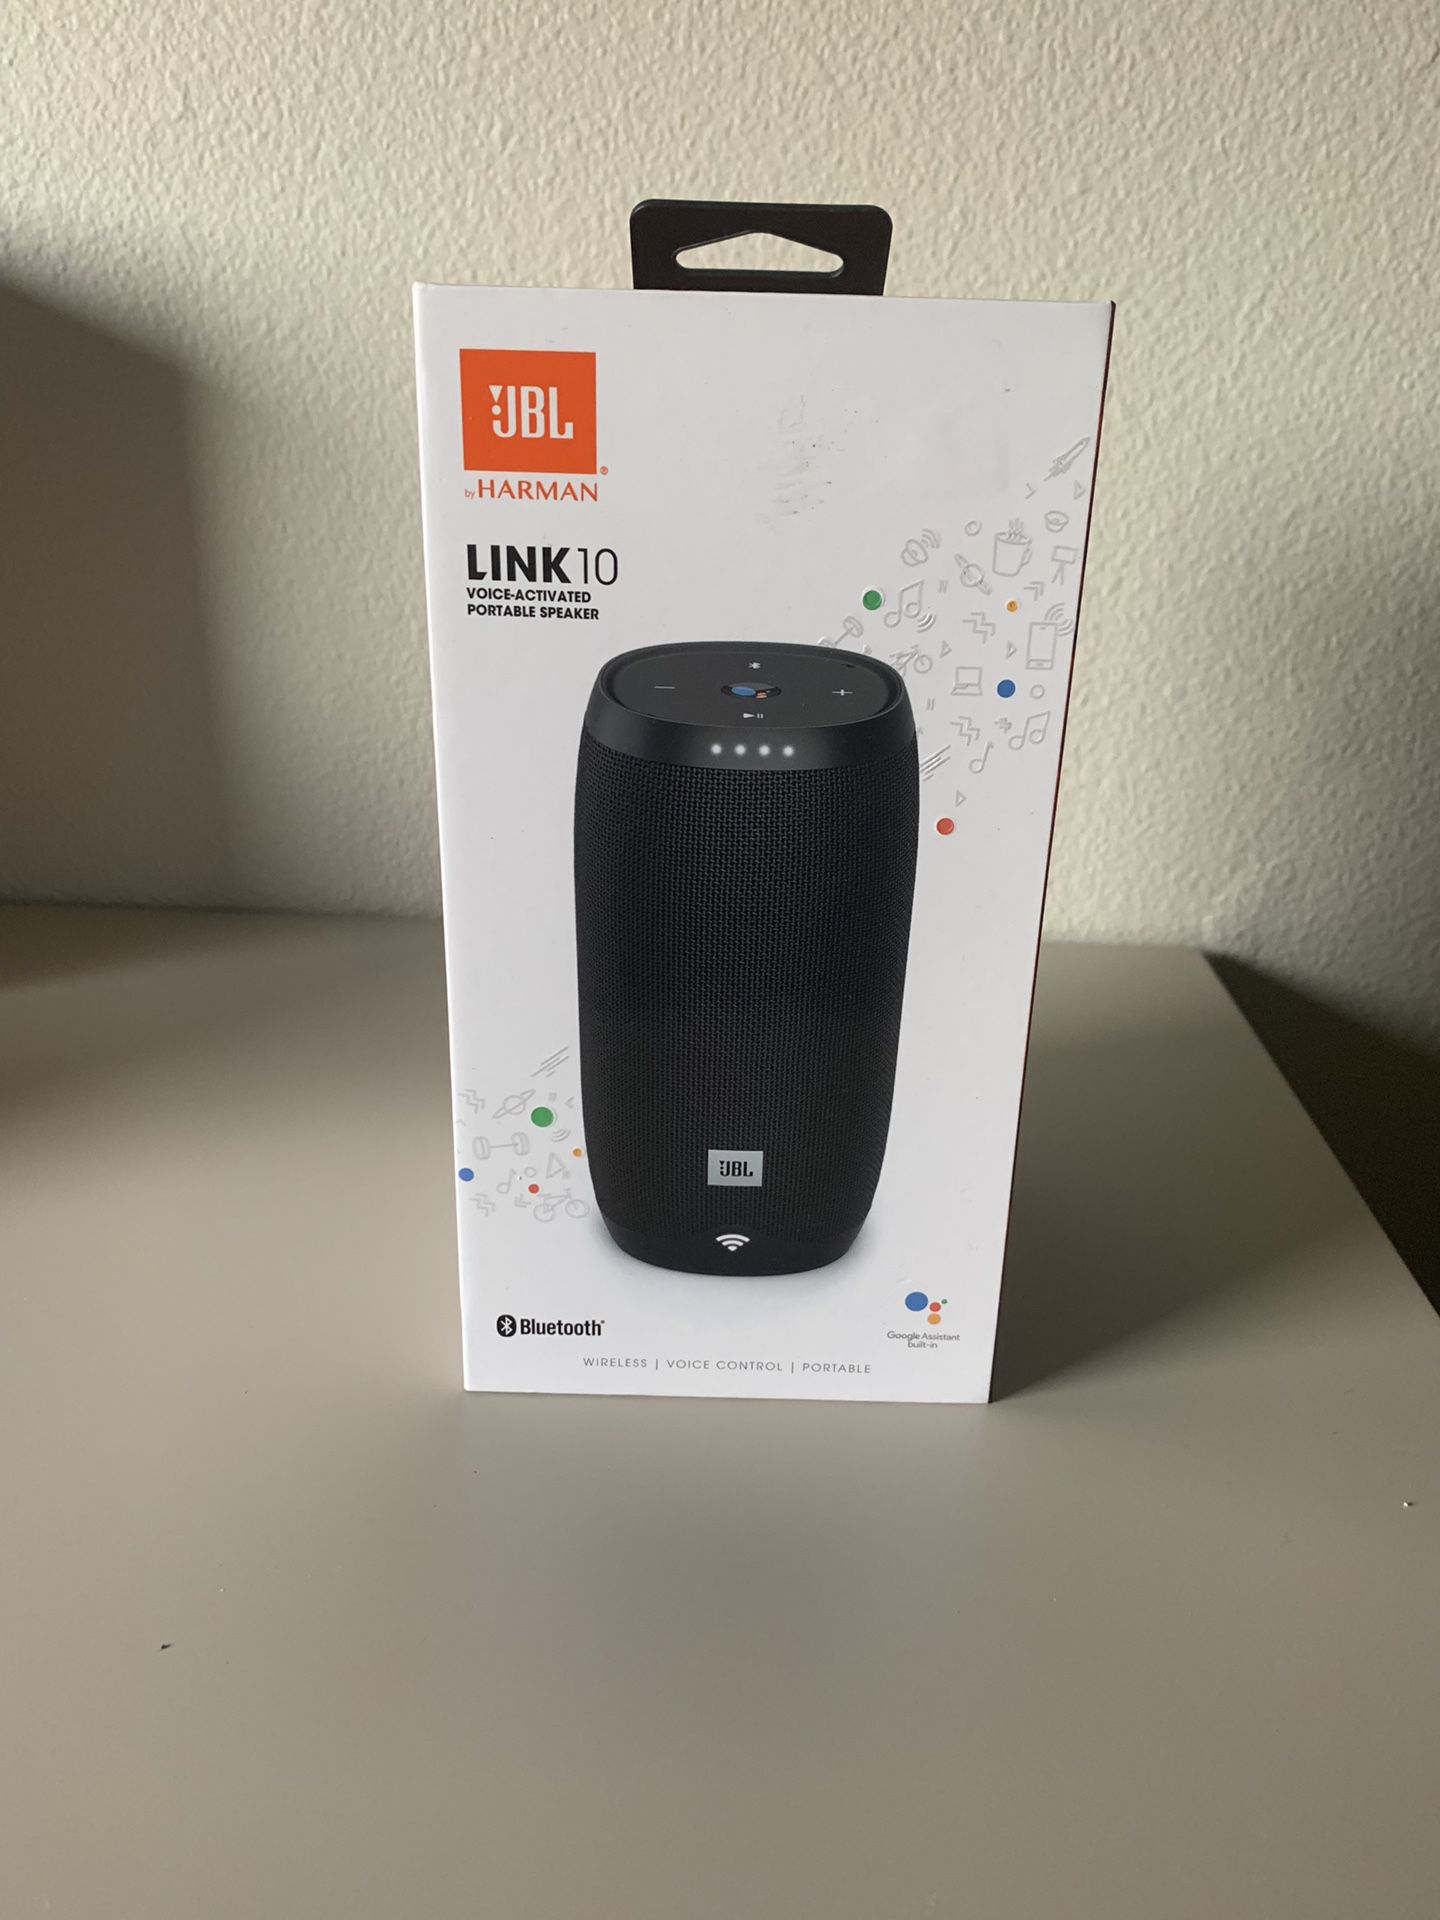 Jbl link10 factory sealed new in box!